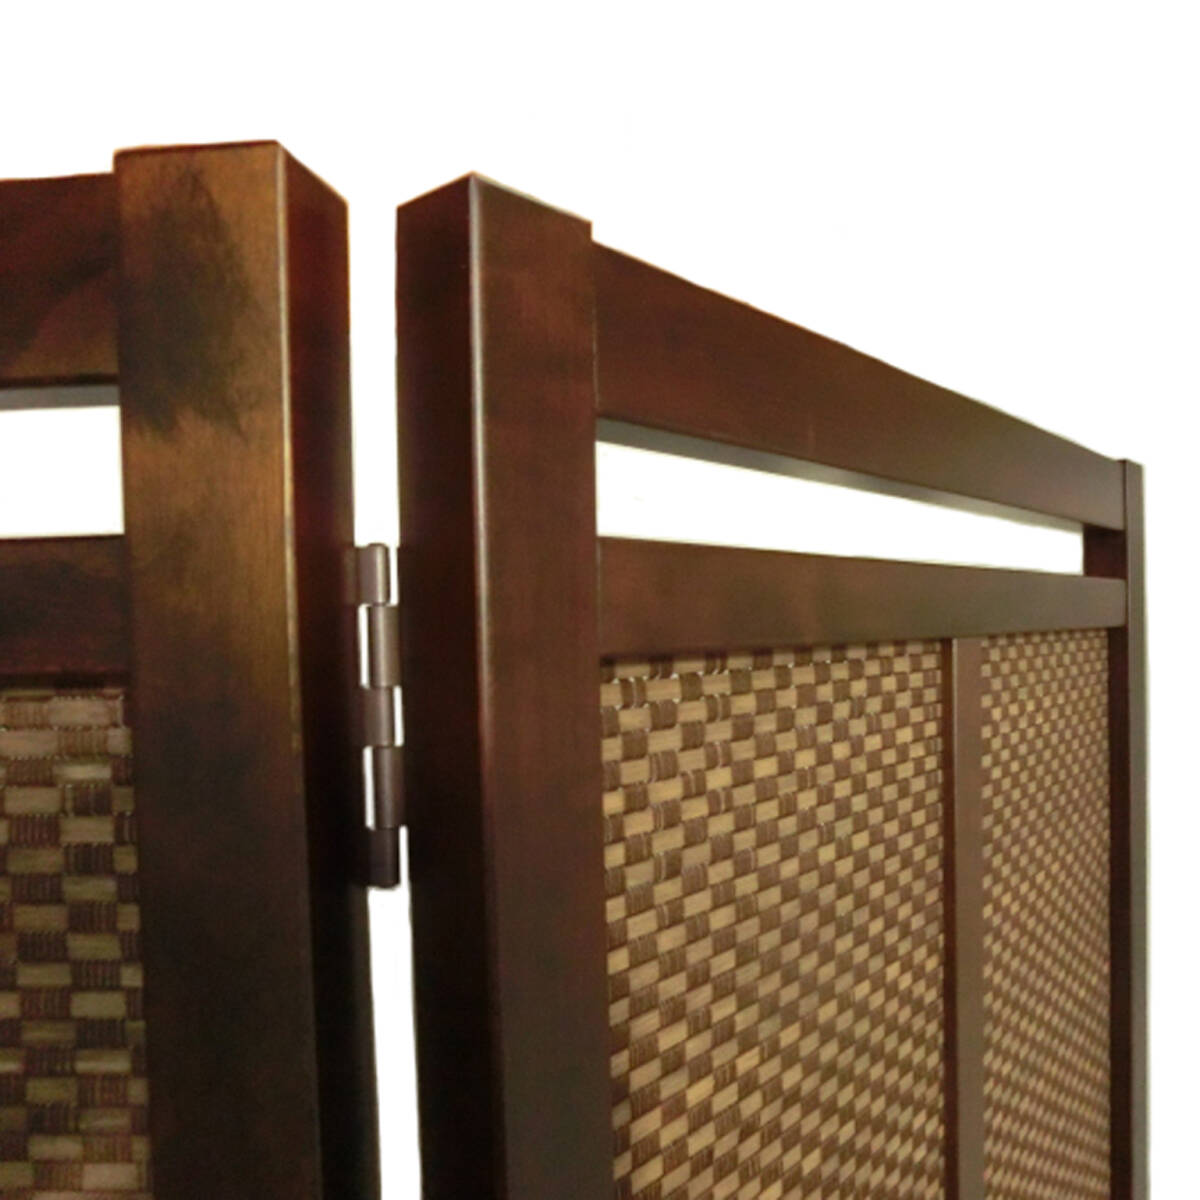  translation have special price partitioning screen 3 ream partition Japanese style modern screen change weave. bamboo . use divider partitioning screen screen ②